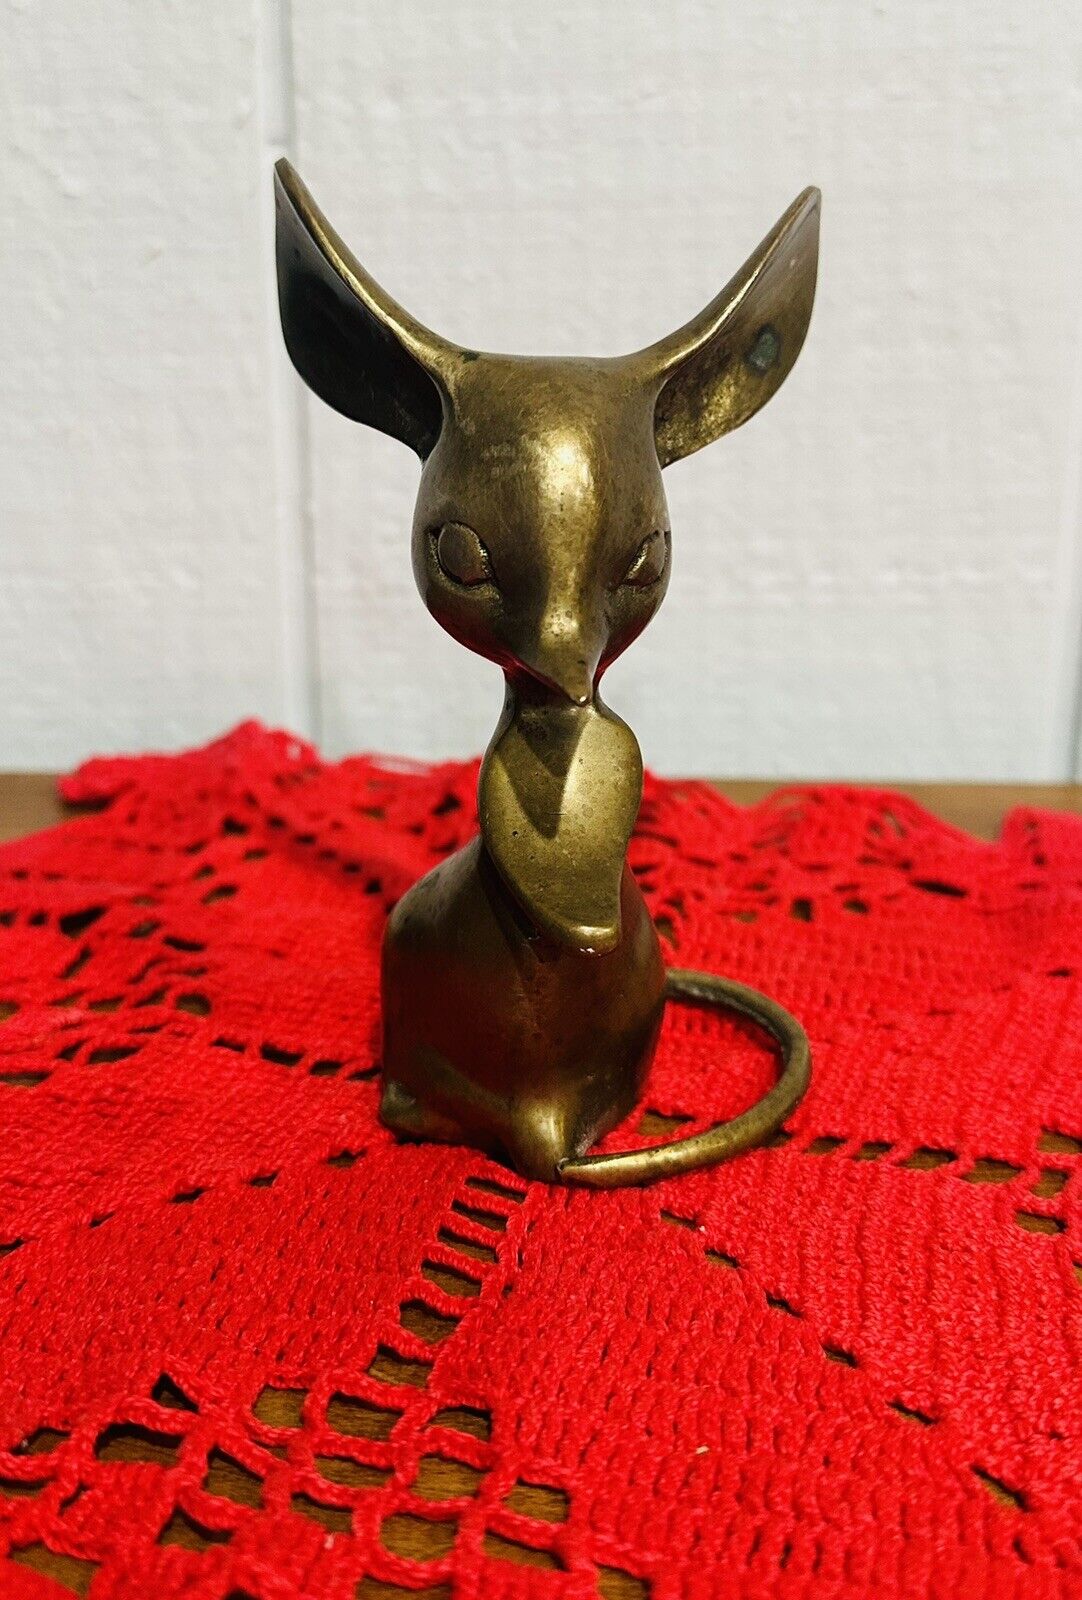 Vintage Solid Brass Big Ear Mouse Heavy Paperweight Figurine 5.25 Tall